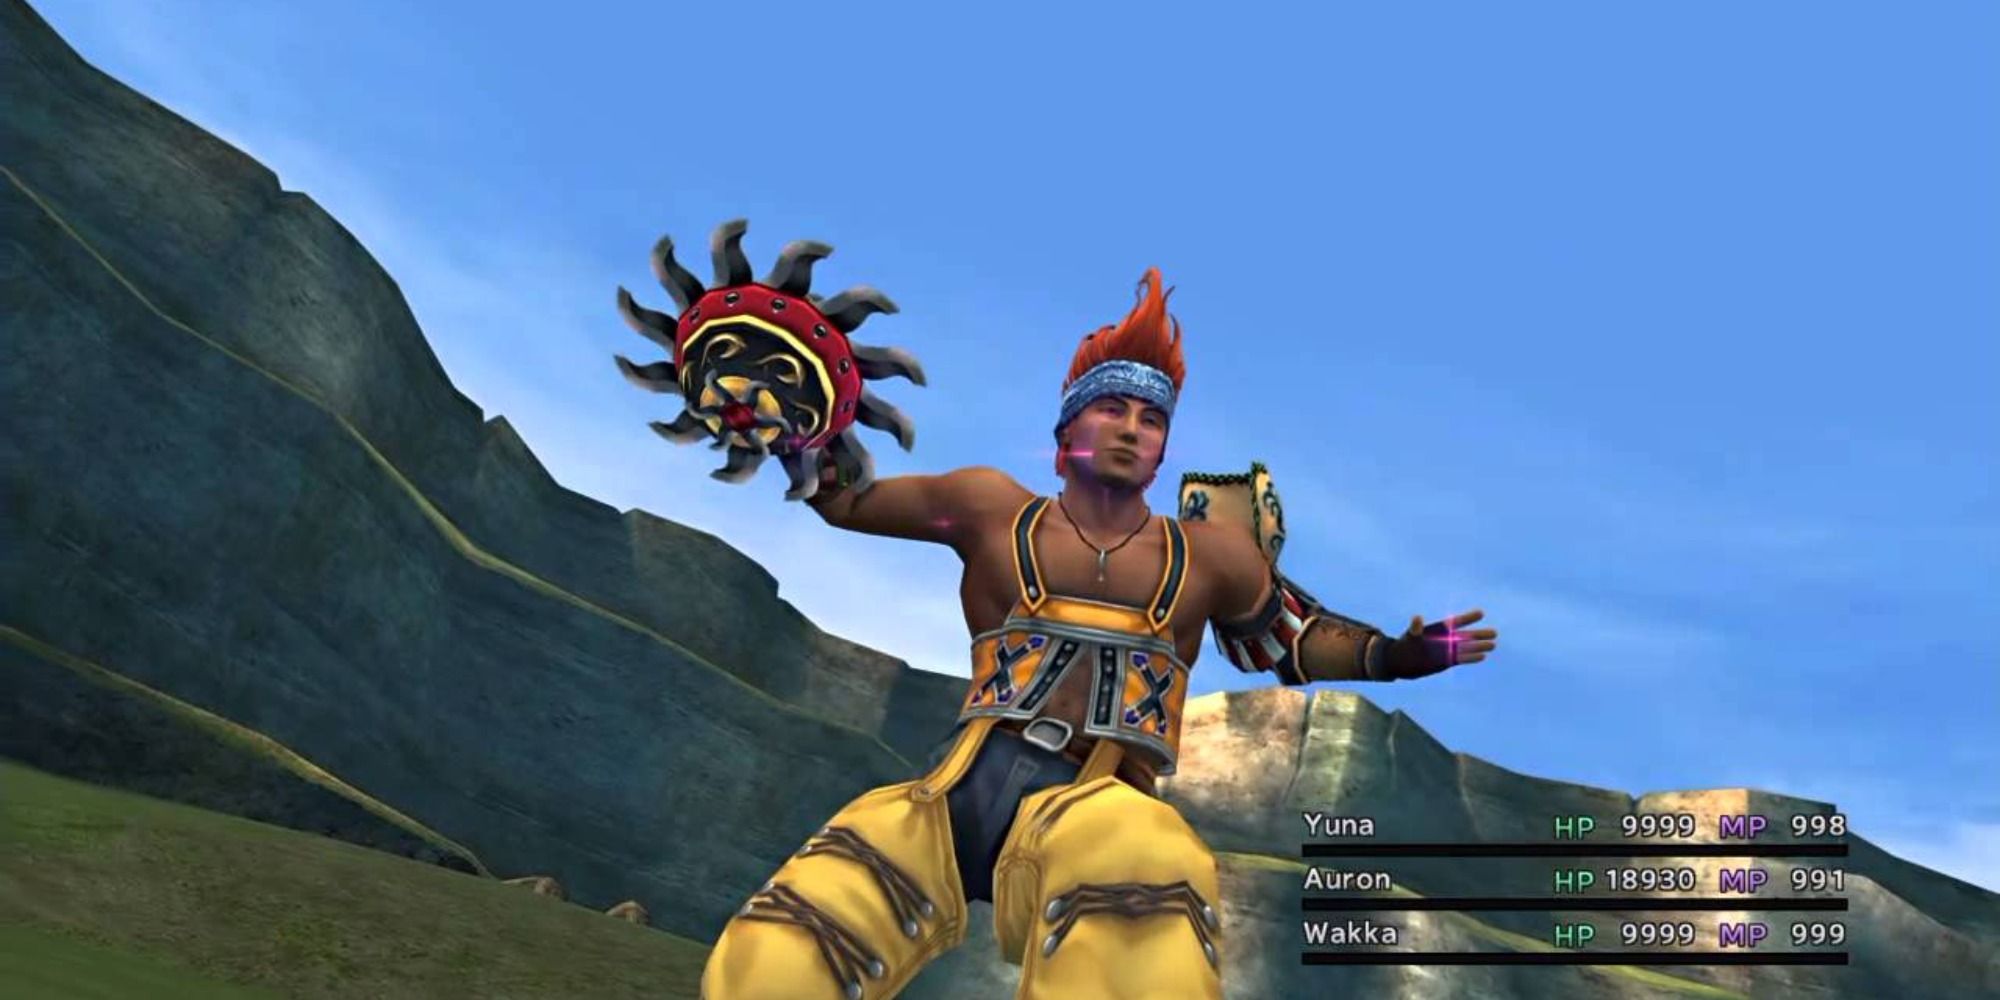 Wakka From Final Fantasy 10 During Battle